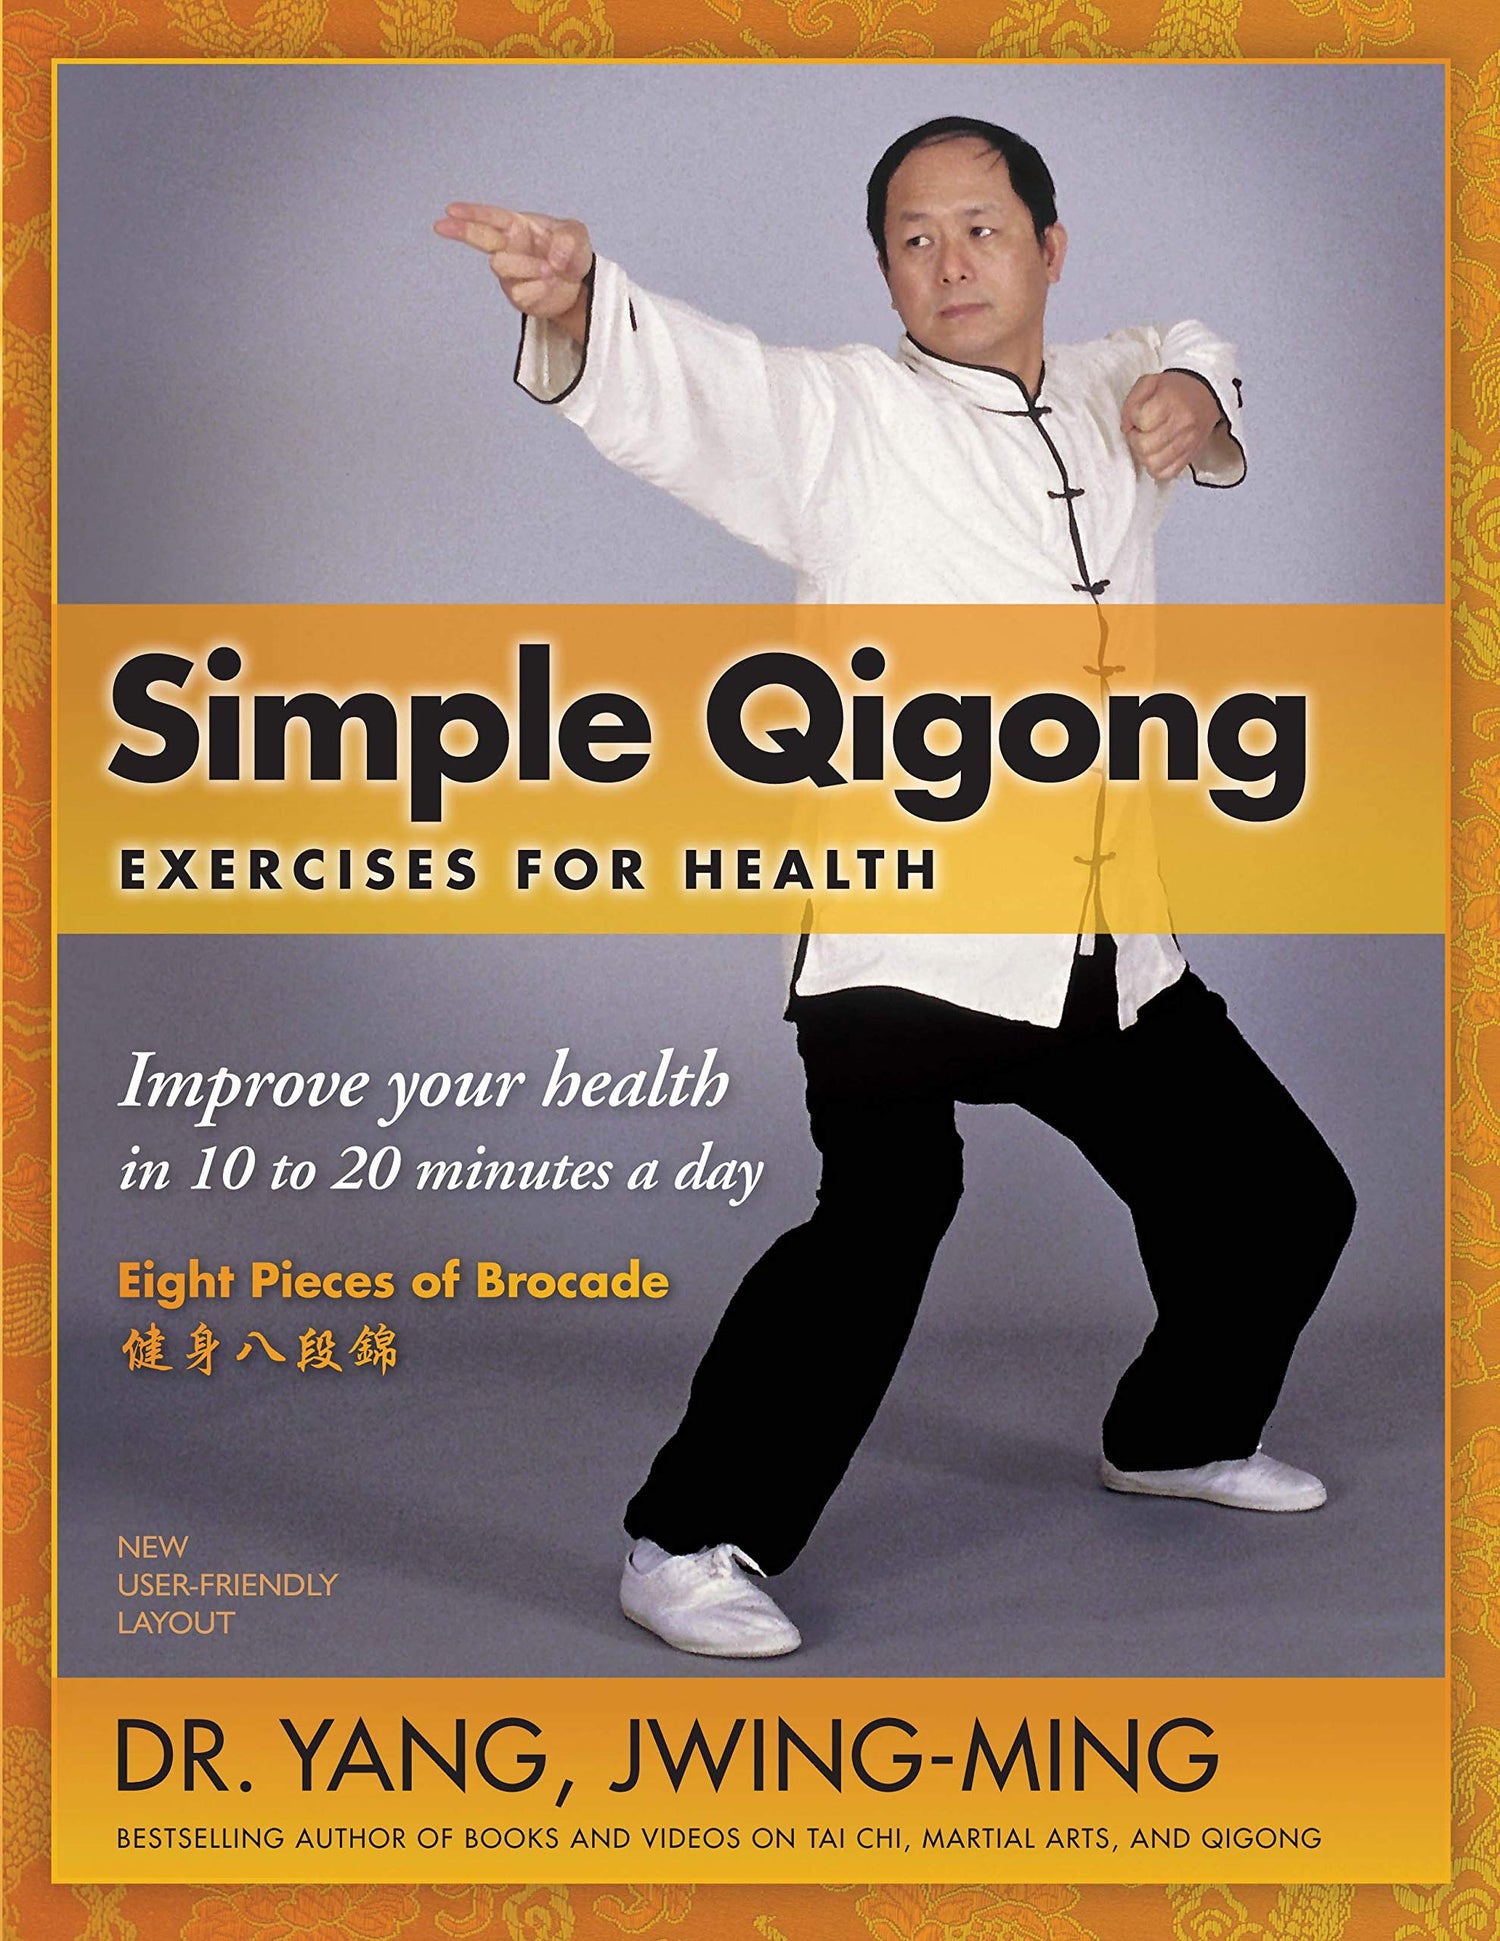 Simple Qigong Exercises for Health: Improve Your Health in 10 to 20 Minutes a Day Book by Dr. Yang, Jwing-Ming - Budovideos Inc